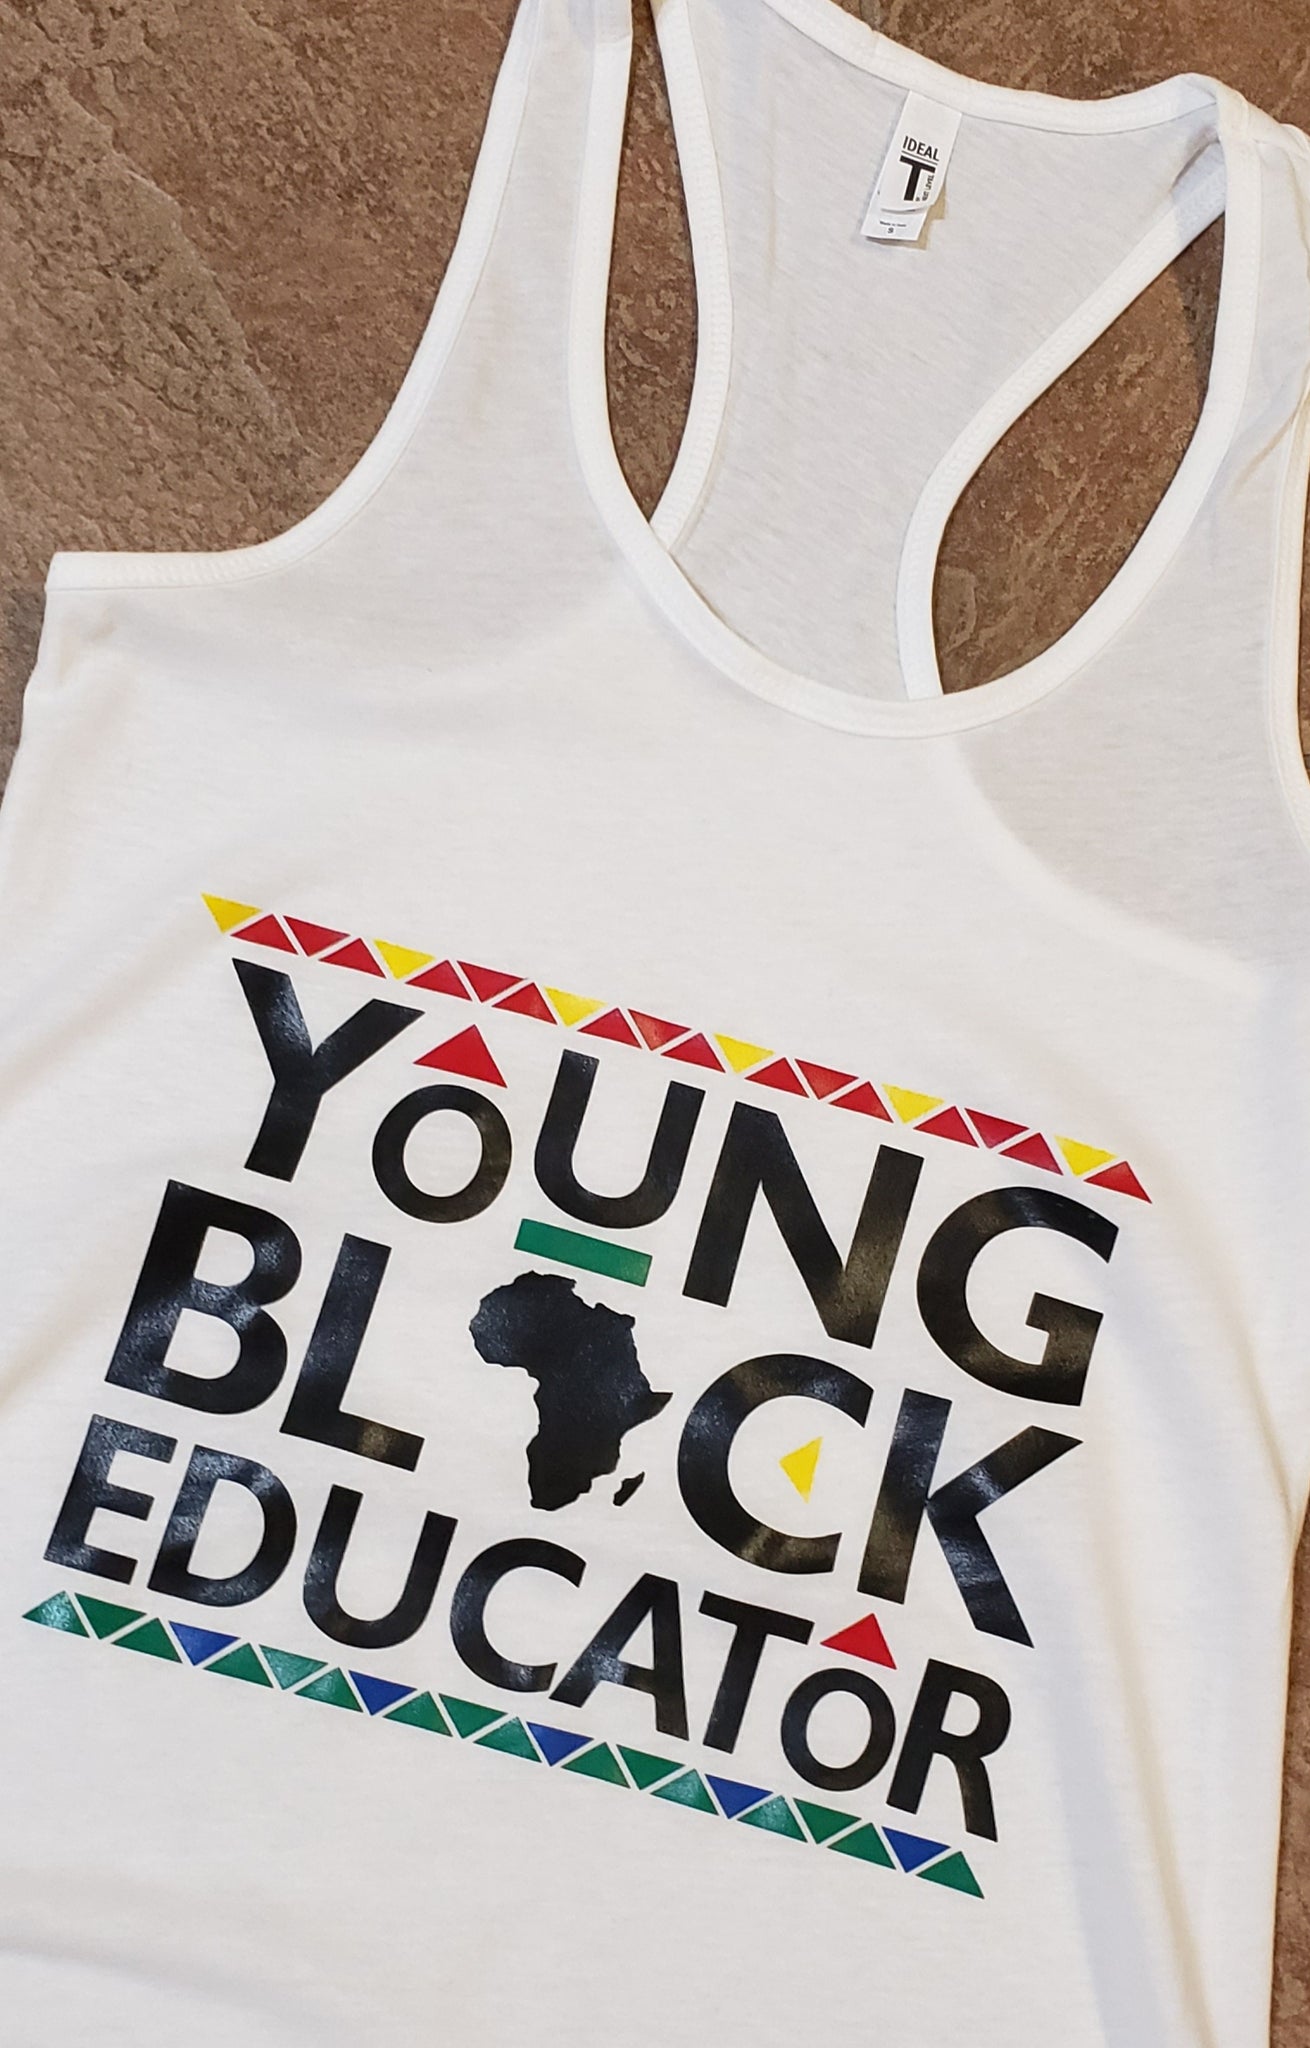 Young Black Educator